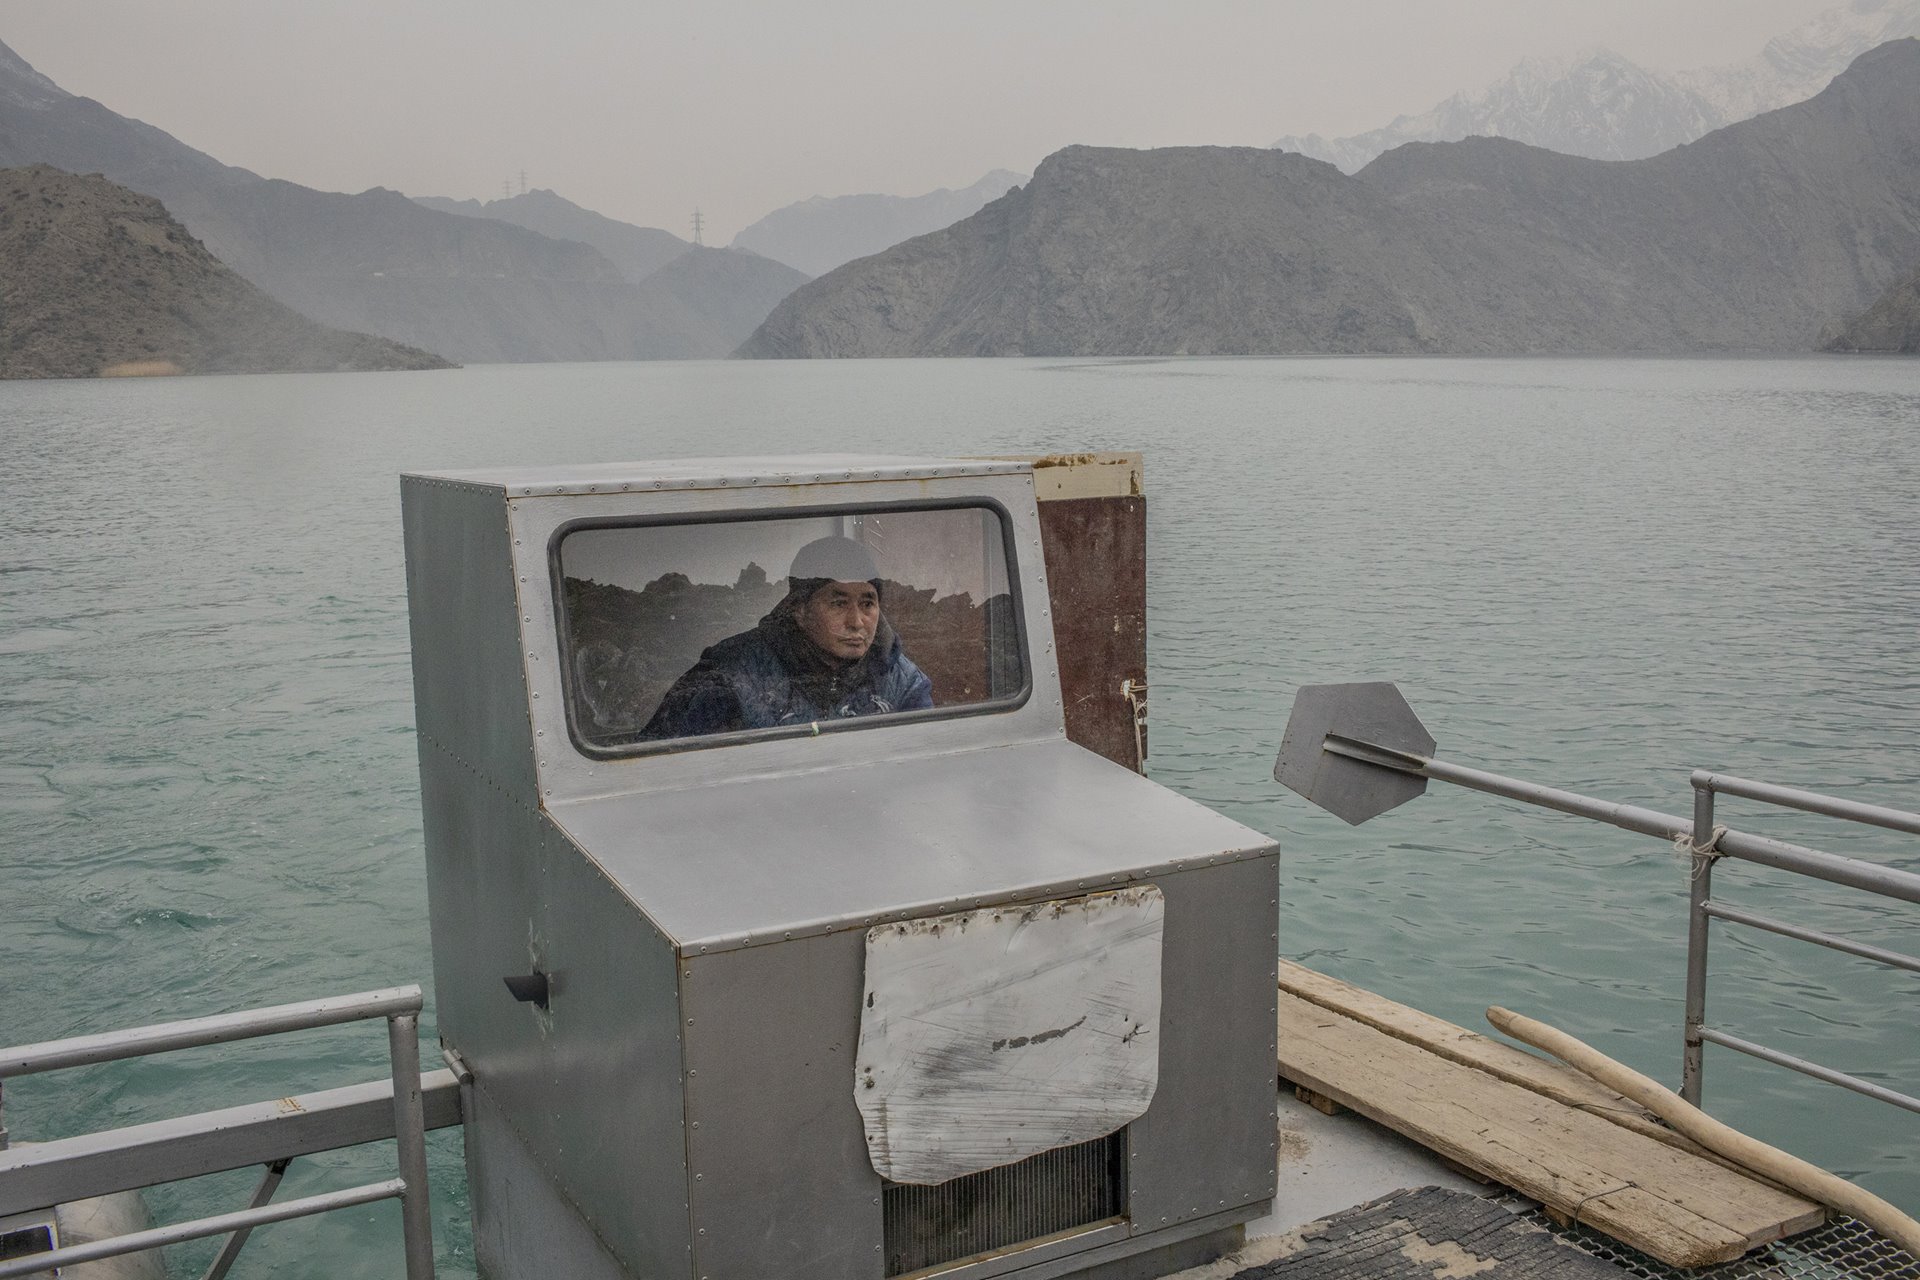 Sonunbek Kadyrov pilots his water taxi, serving the village of Kyzyl-Beyit, Kyrgyzstan. Local access to the main road was blocked by flooding during construction of the Kurpsayskaya Dam in the 1960s.